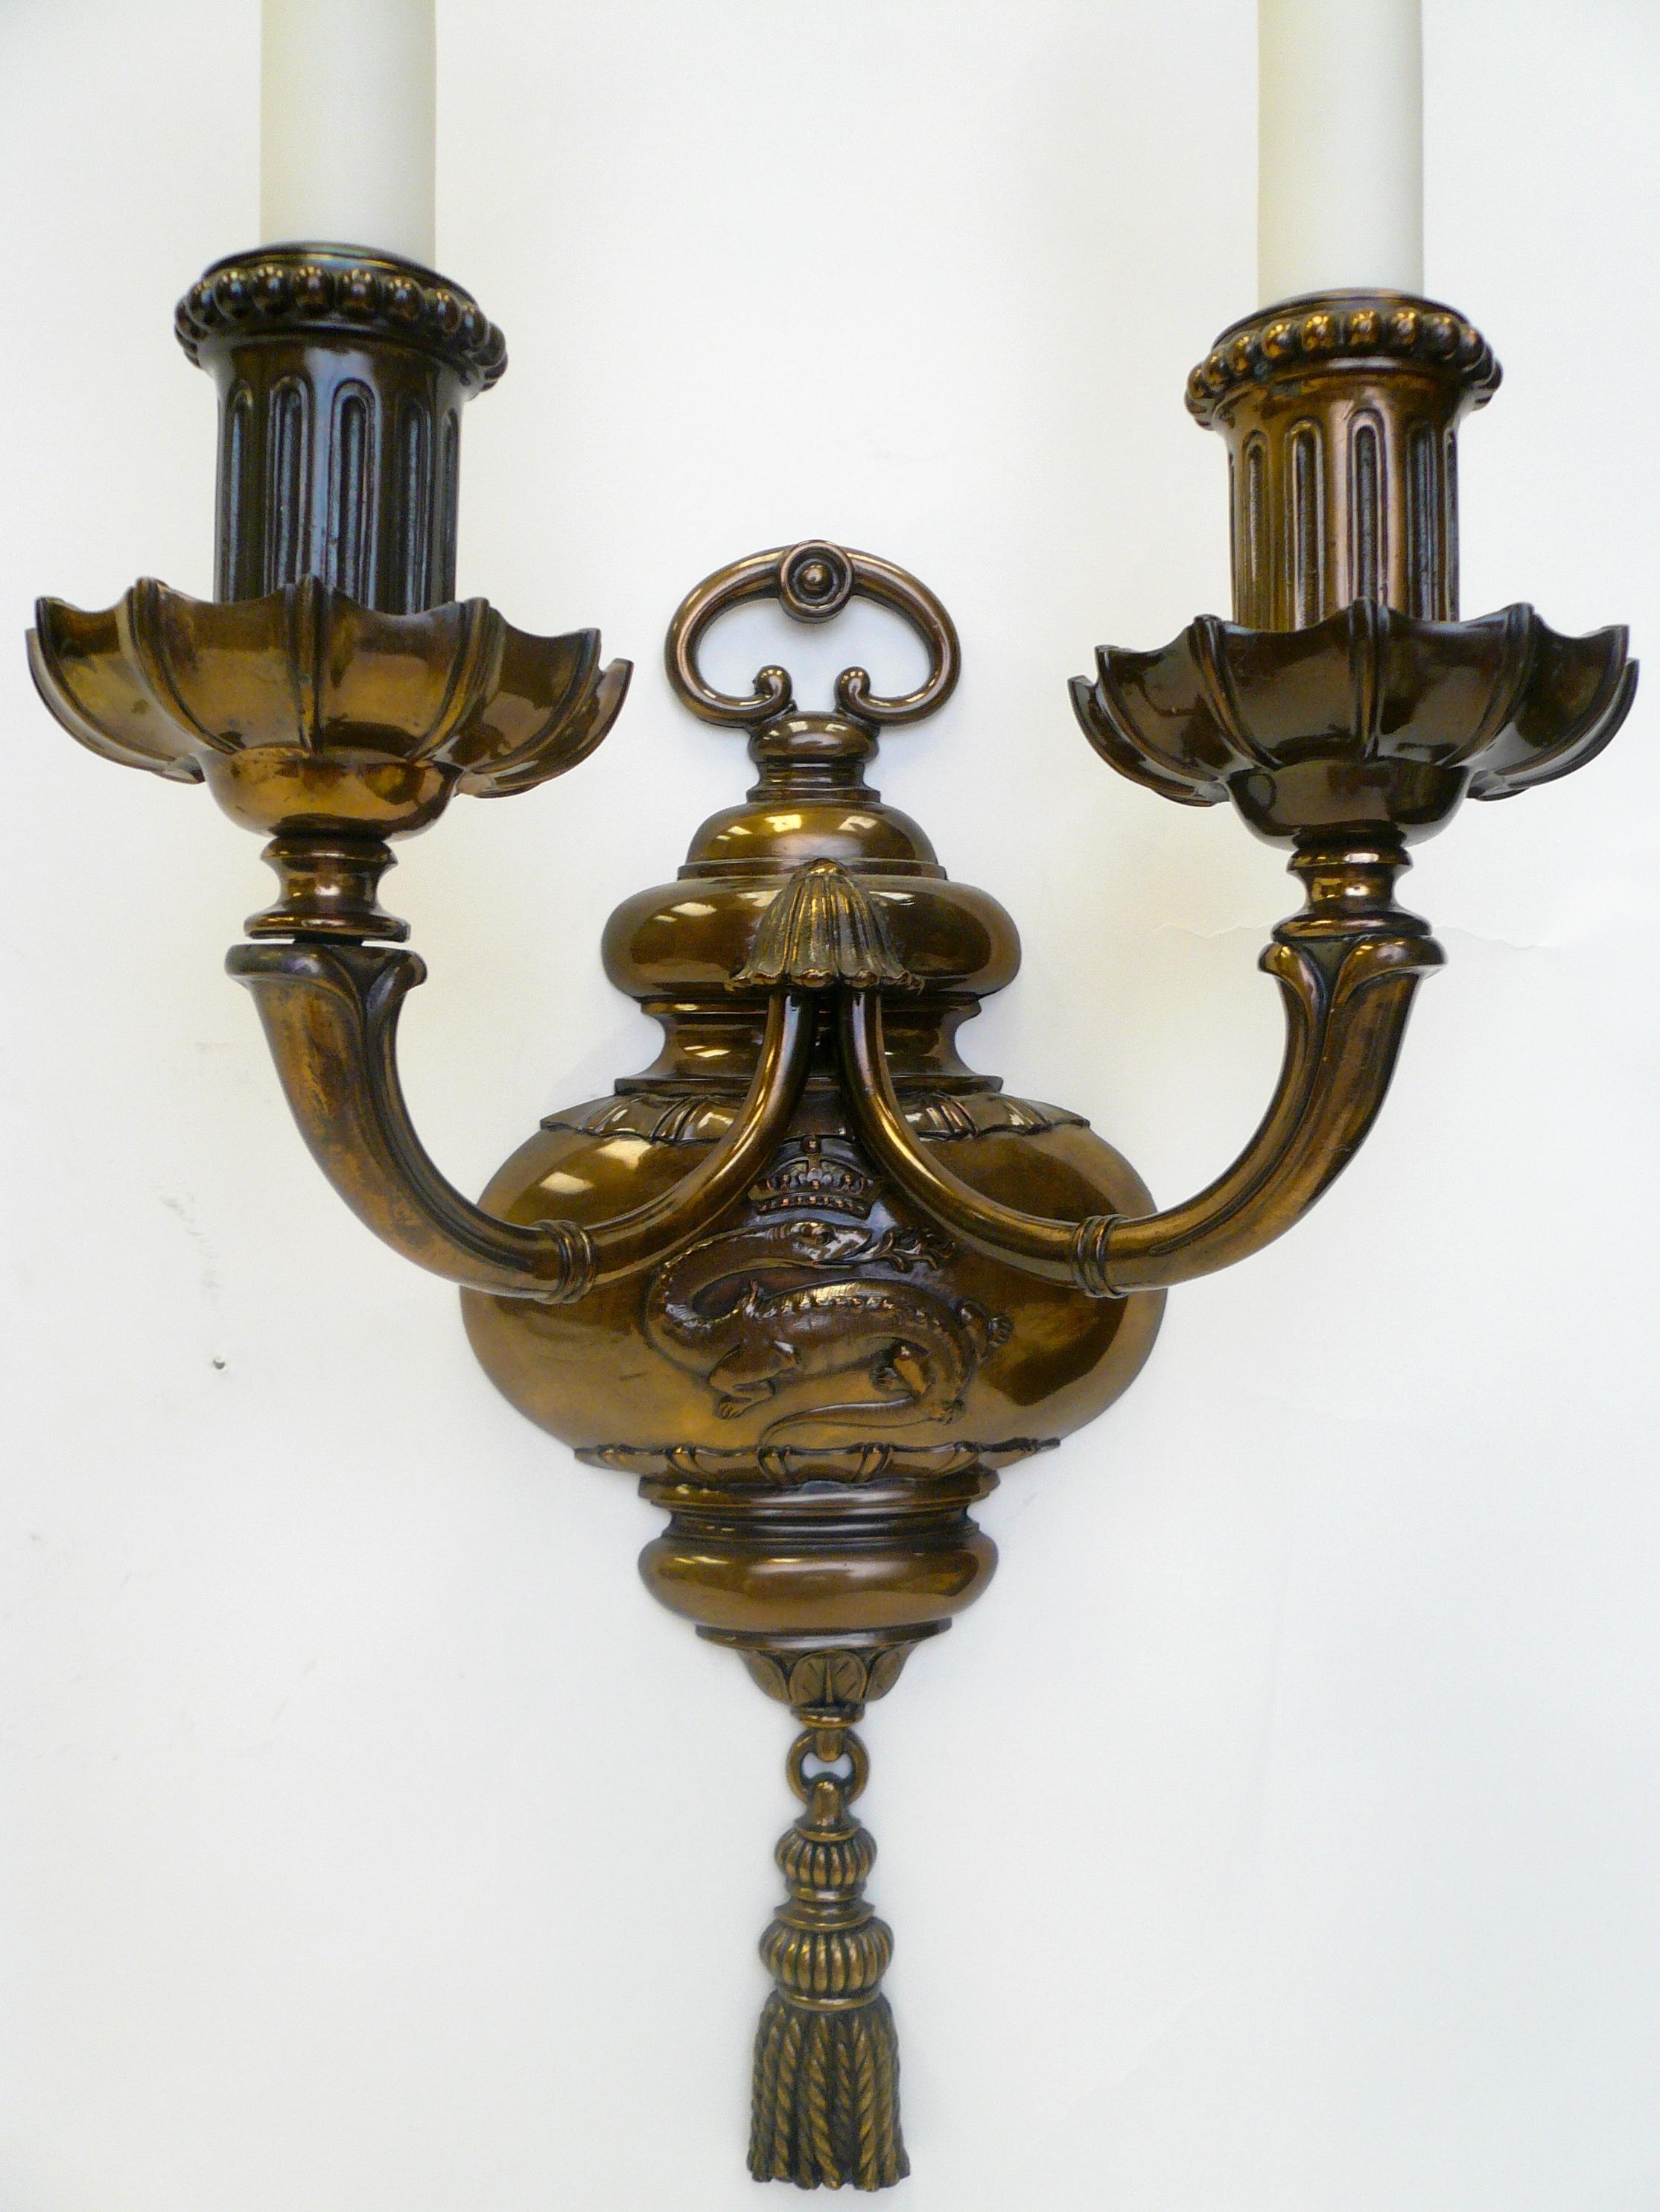 This pair of 'Old English' style sconces by renowned maker Edward F. Caldwell features dragons surmounted by noble crests, and terminate in finely detailed tassels.